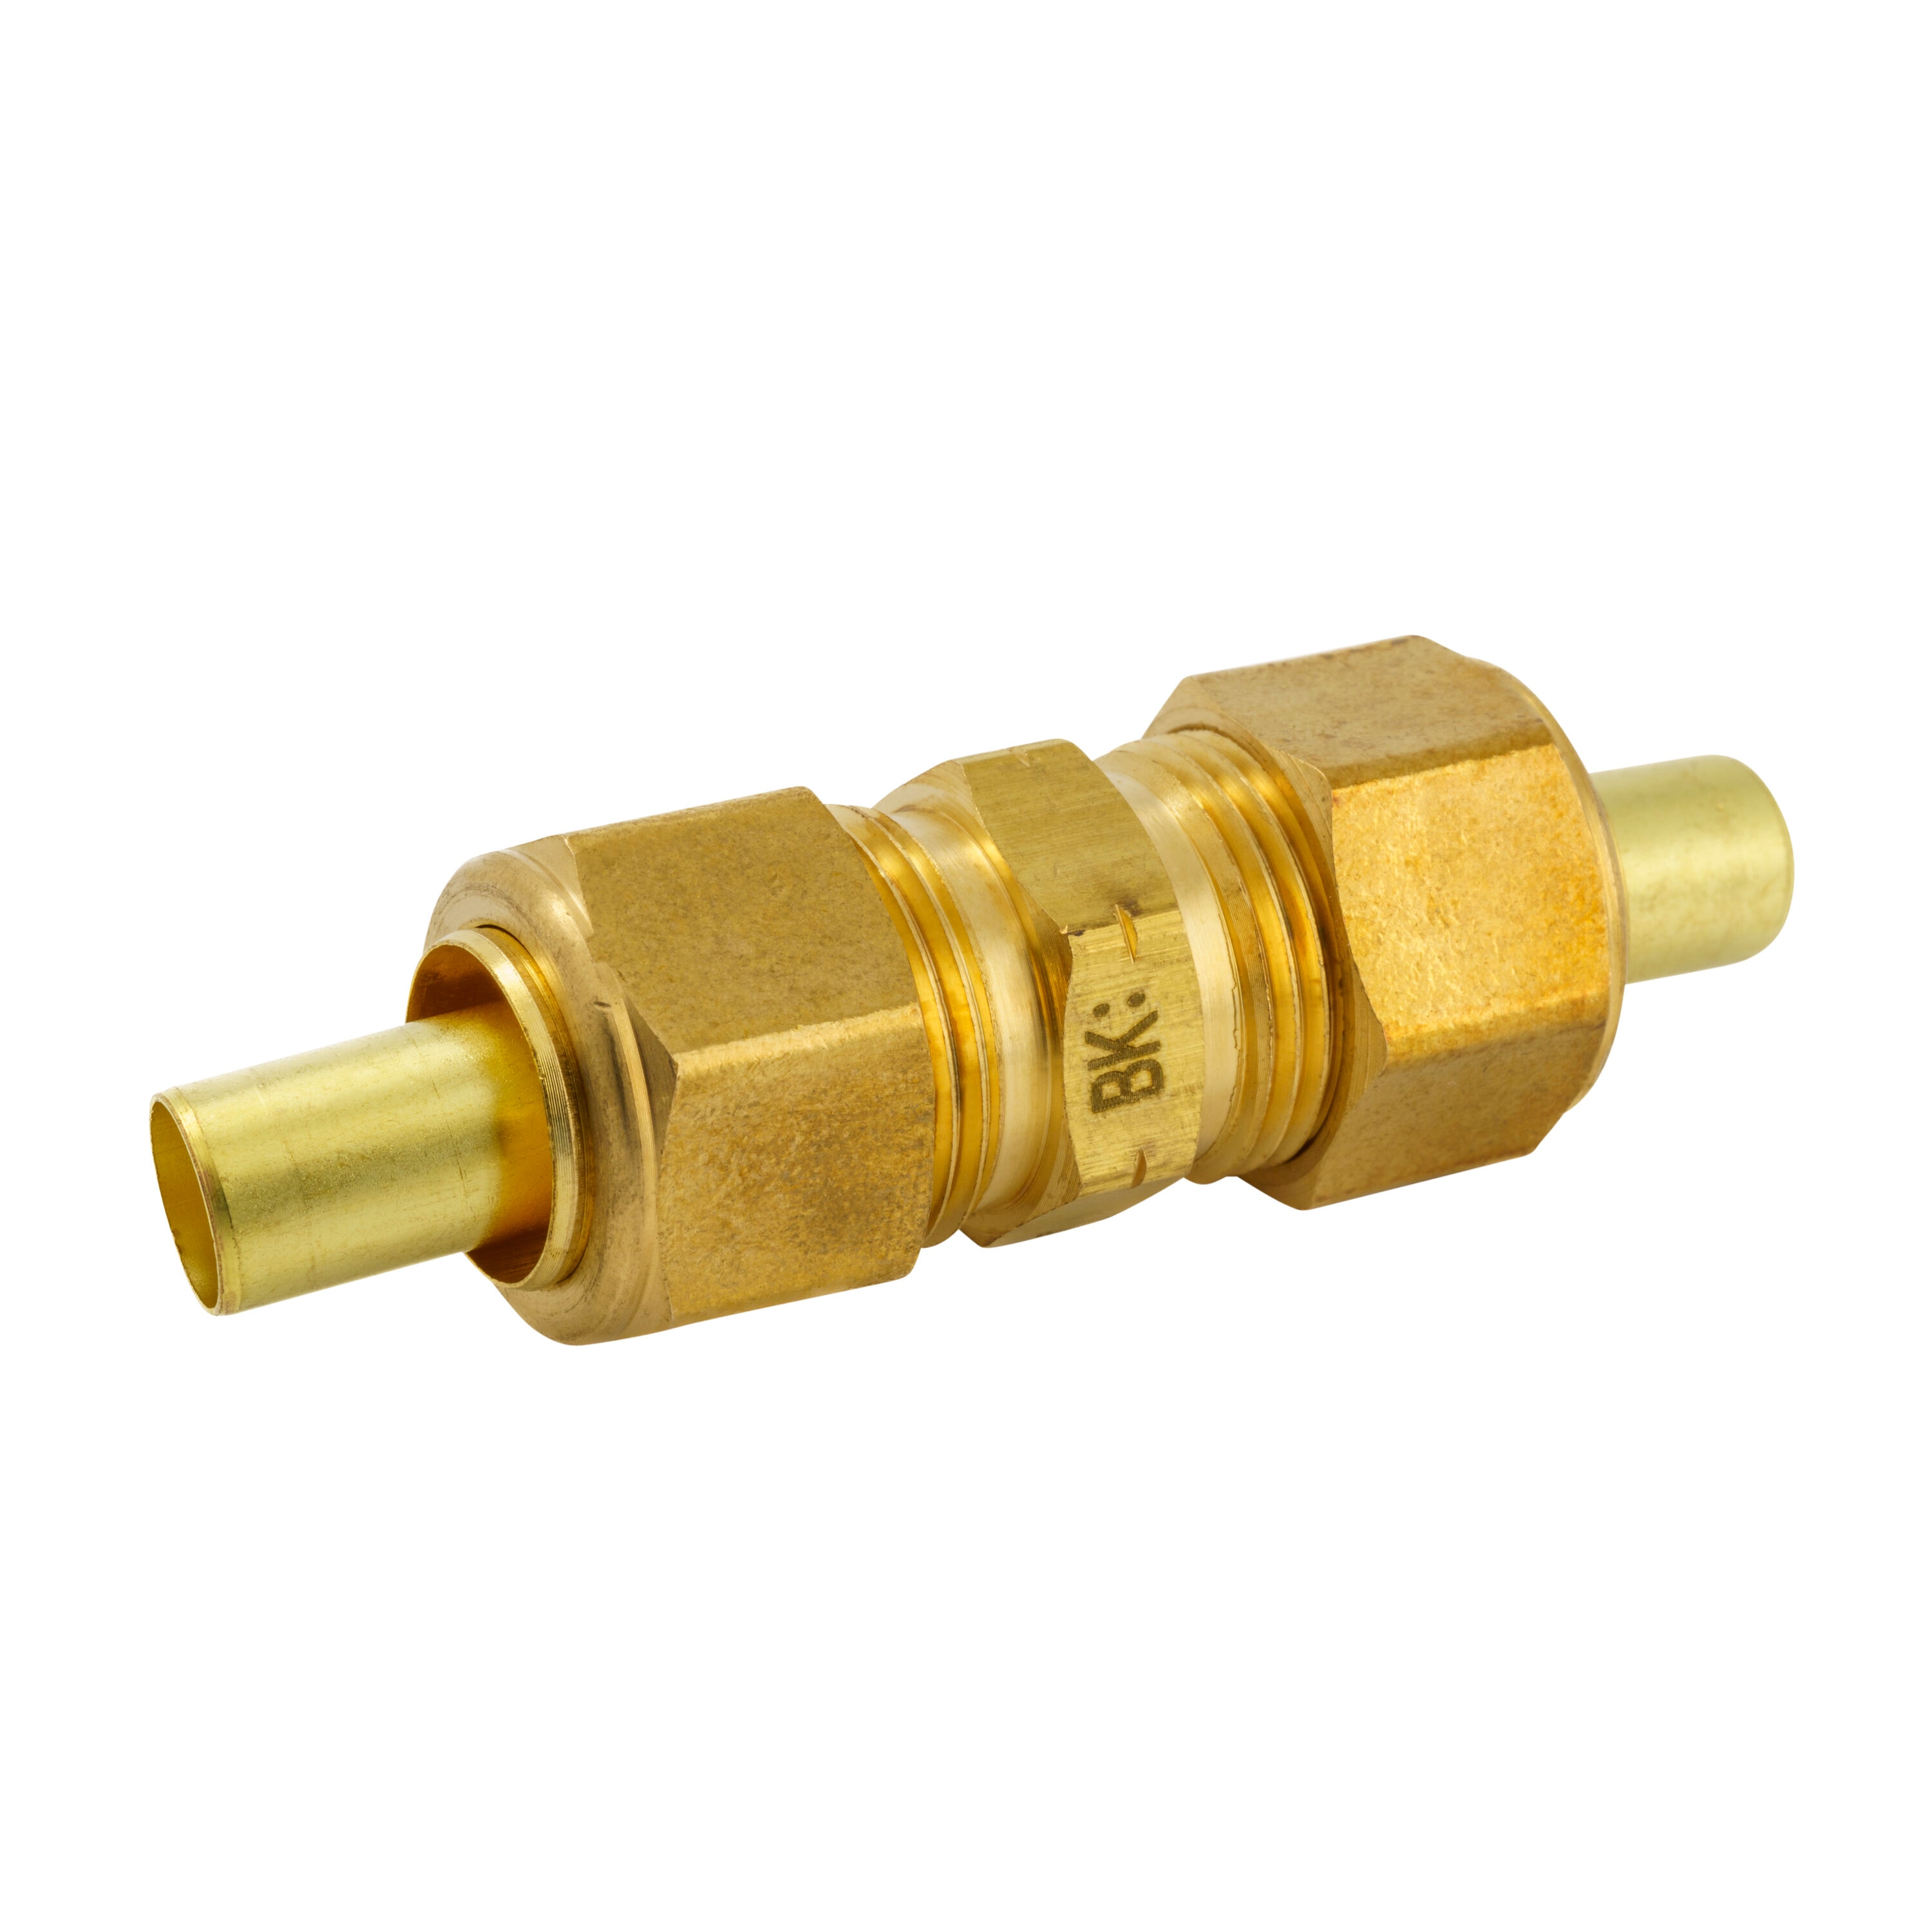 1/4OD Quick Connect x 1/4 COMP Female Brass Adapter 5 Pack